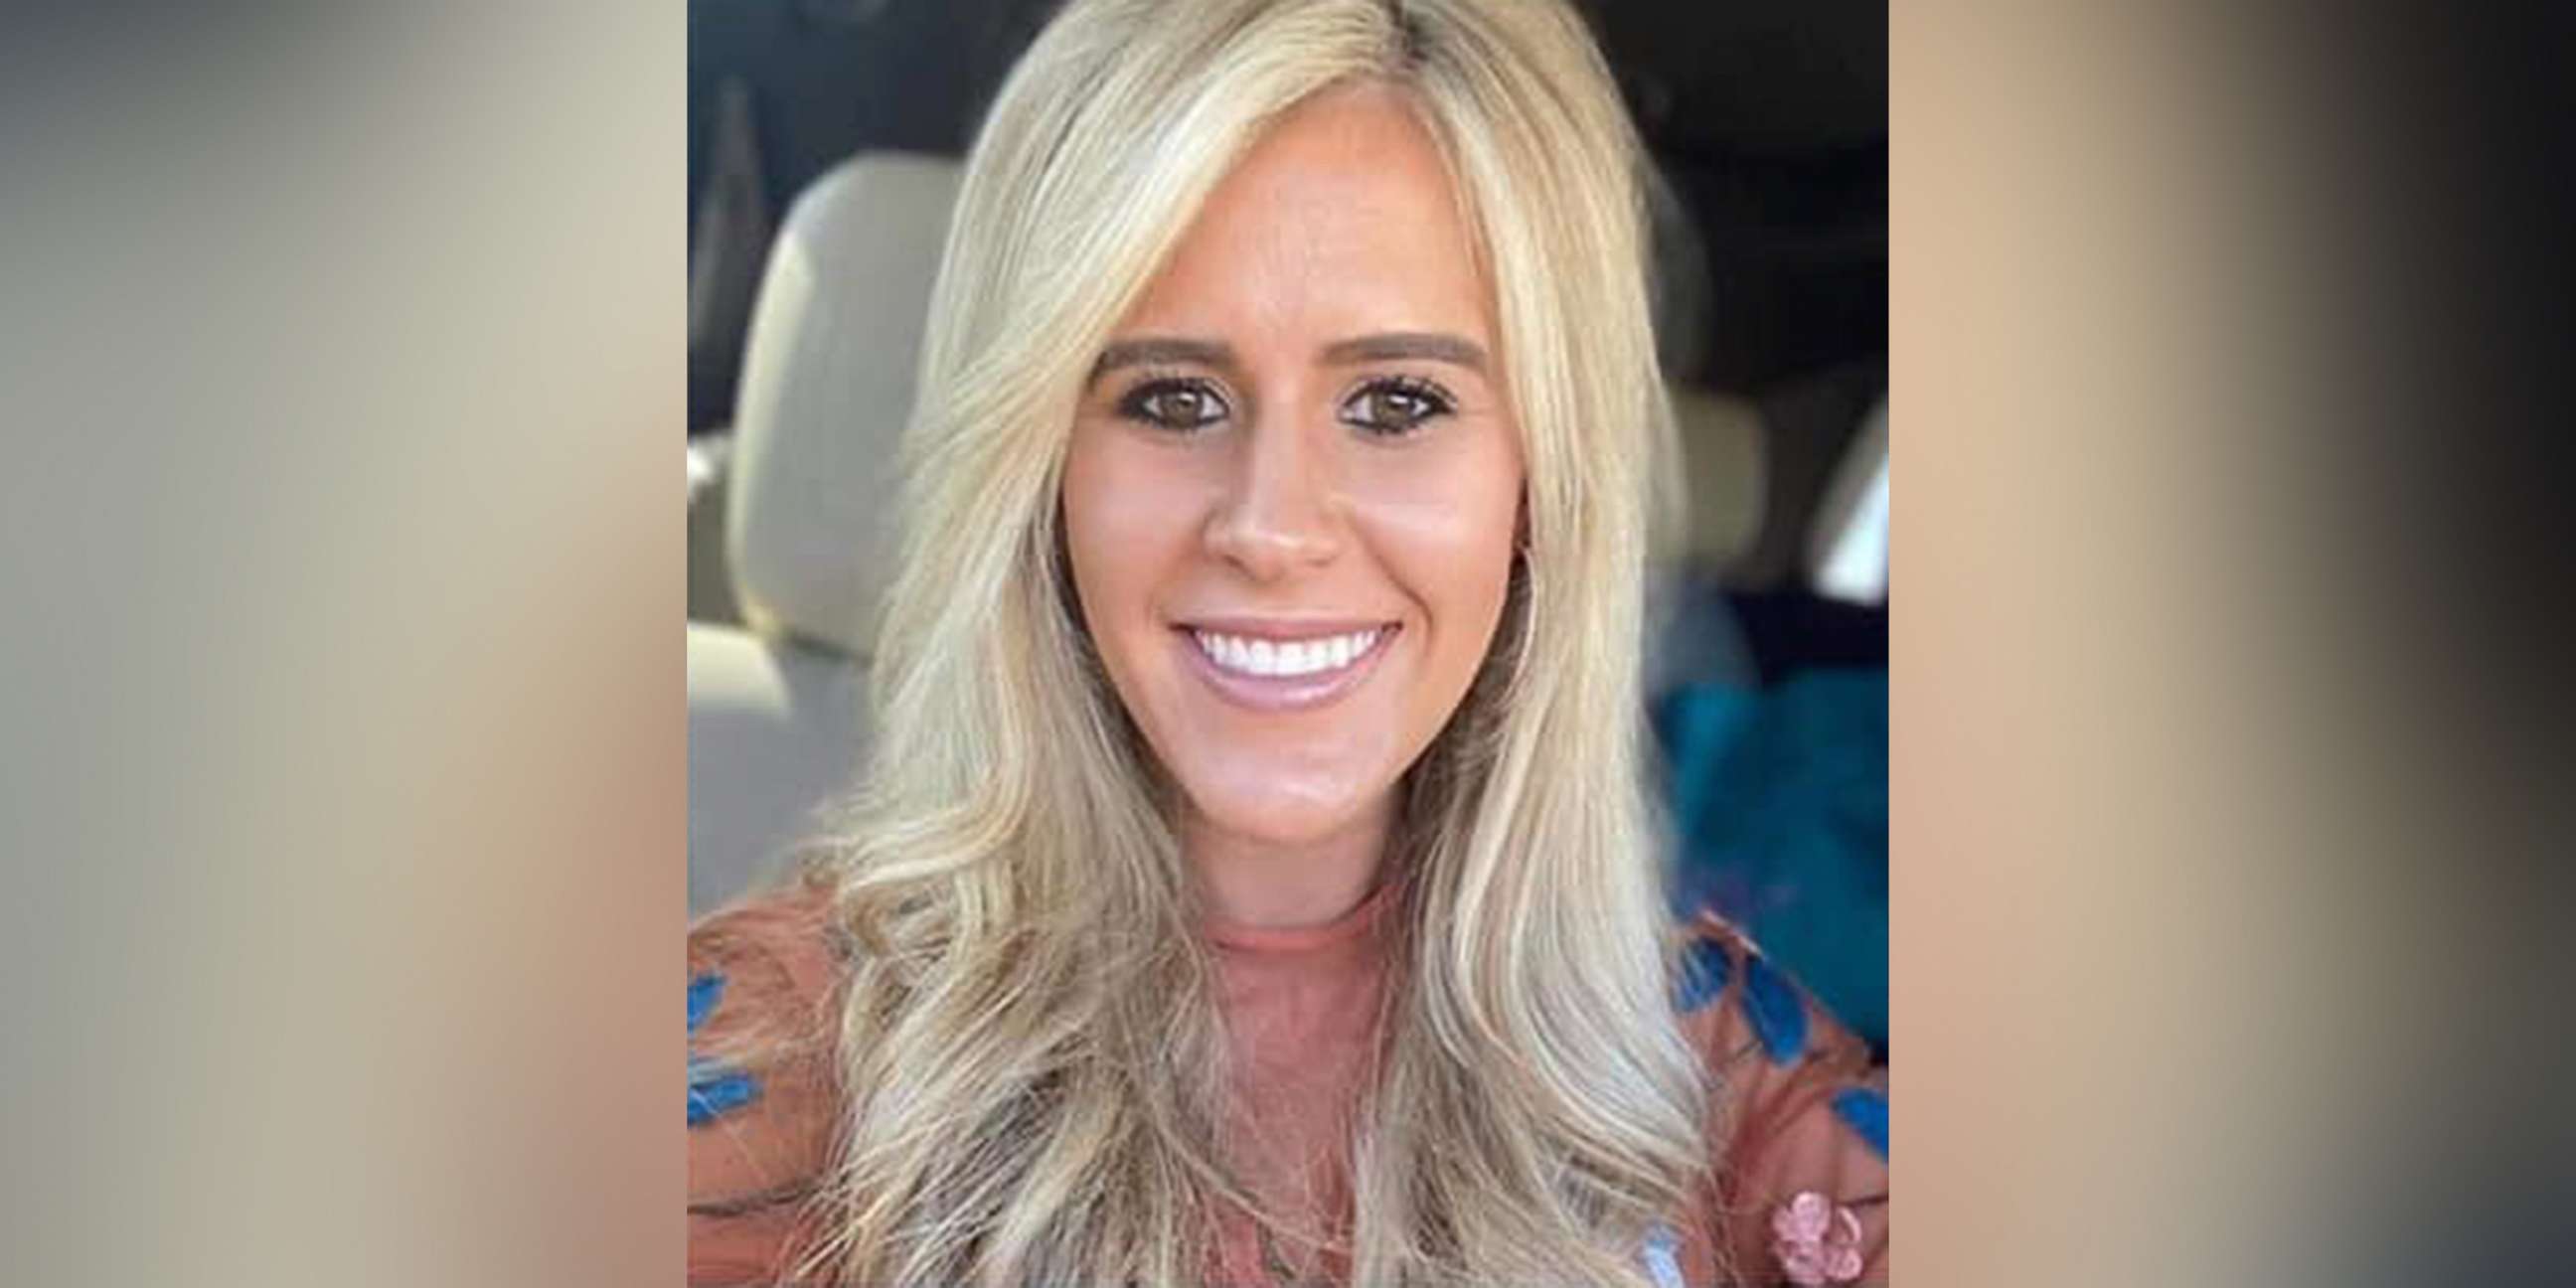 PHOTO: A photo released by authorities after 25-year-old Sydney Sutherland disappeared after going for a run in Jackson County, Ark., Aug. 19, 2020. Her body was discovered two days after she went missing.